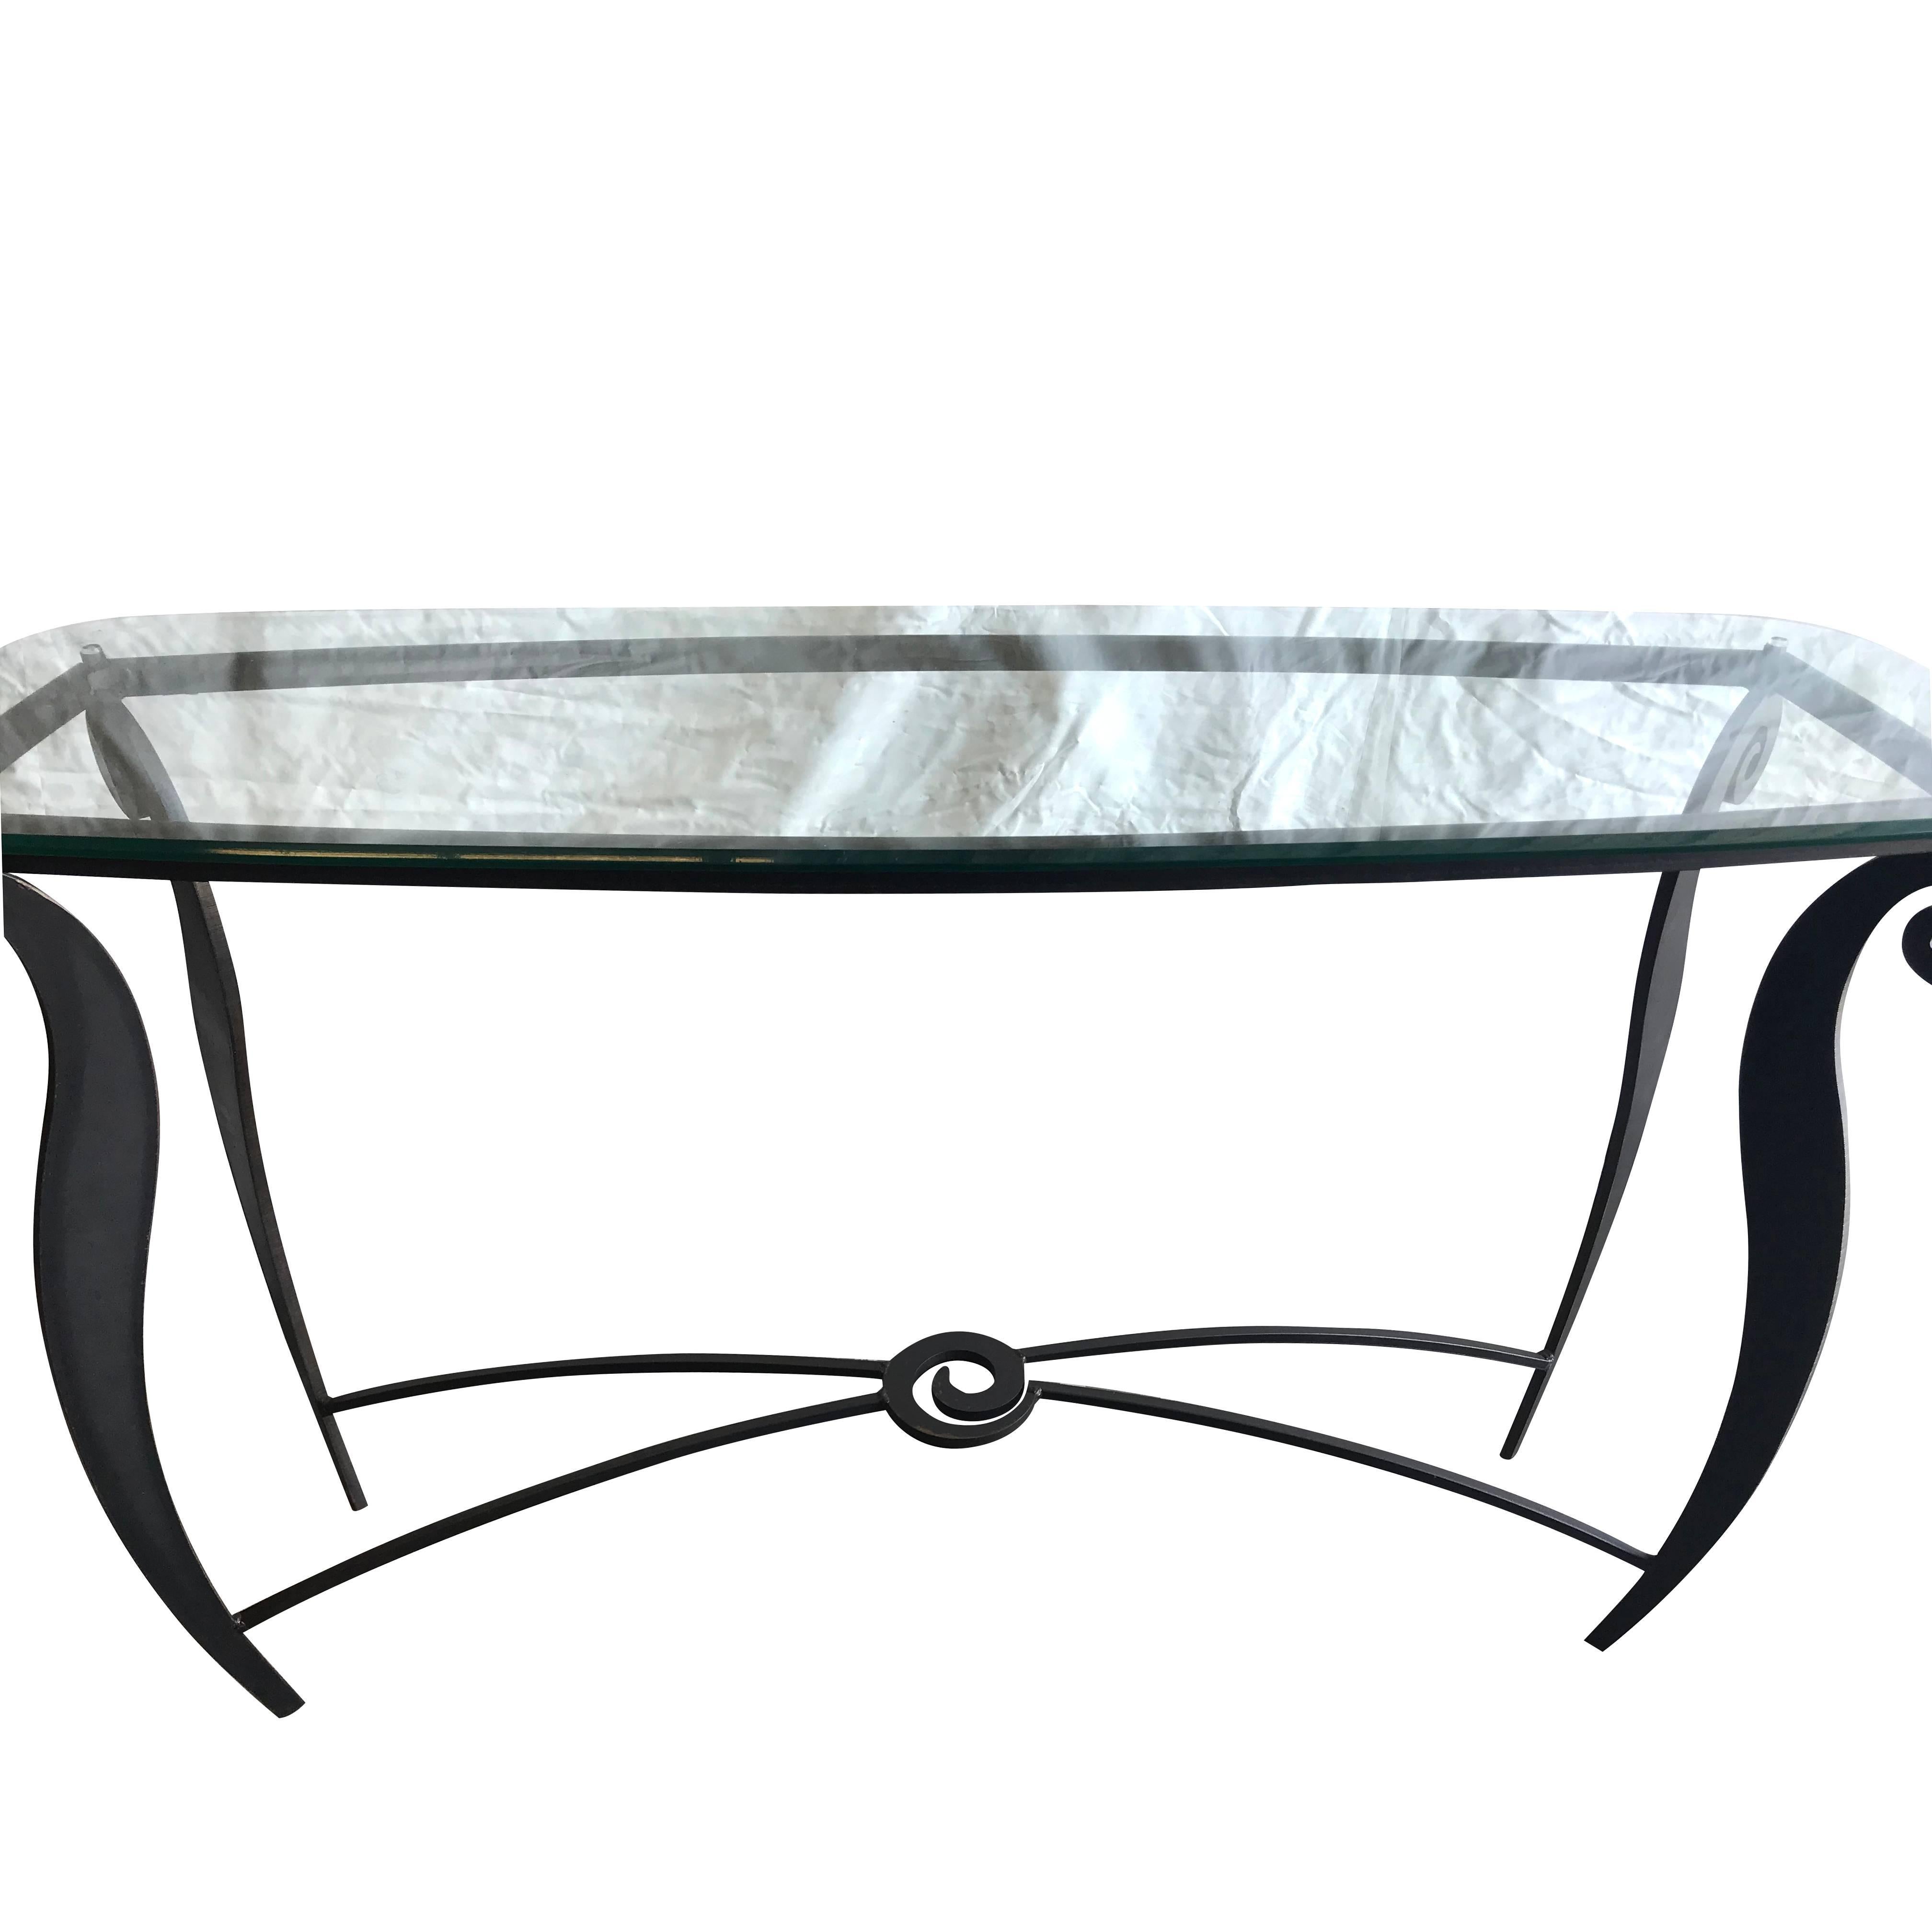 A vintage Mid-Century Modern Italian Pucci De Rossi freestanding console table with metal base and glass top, in good condition. Wear consistent with age and use, circa 1970 - 1980, Italy.

Pucci De Rossi was an Italian designer, artist and